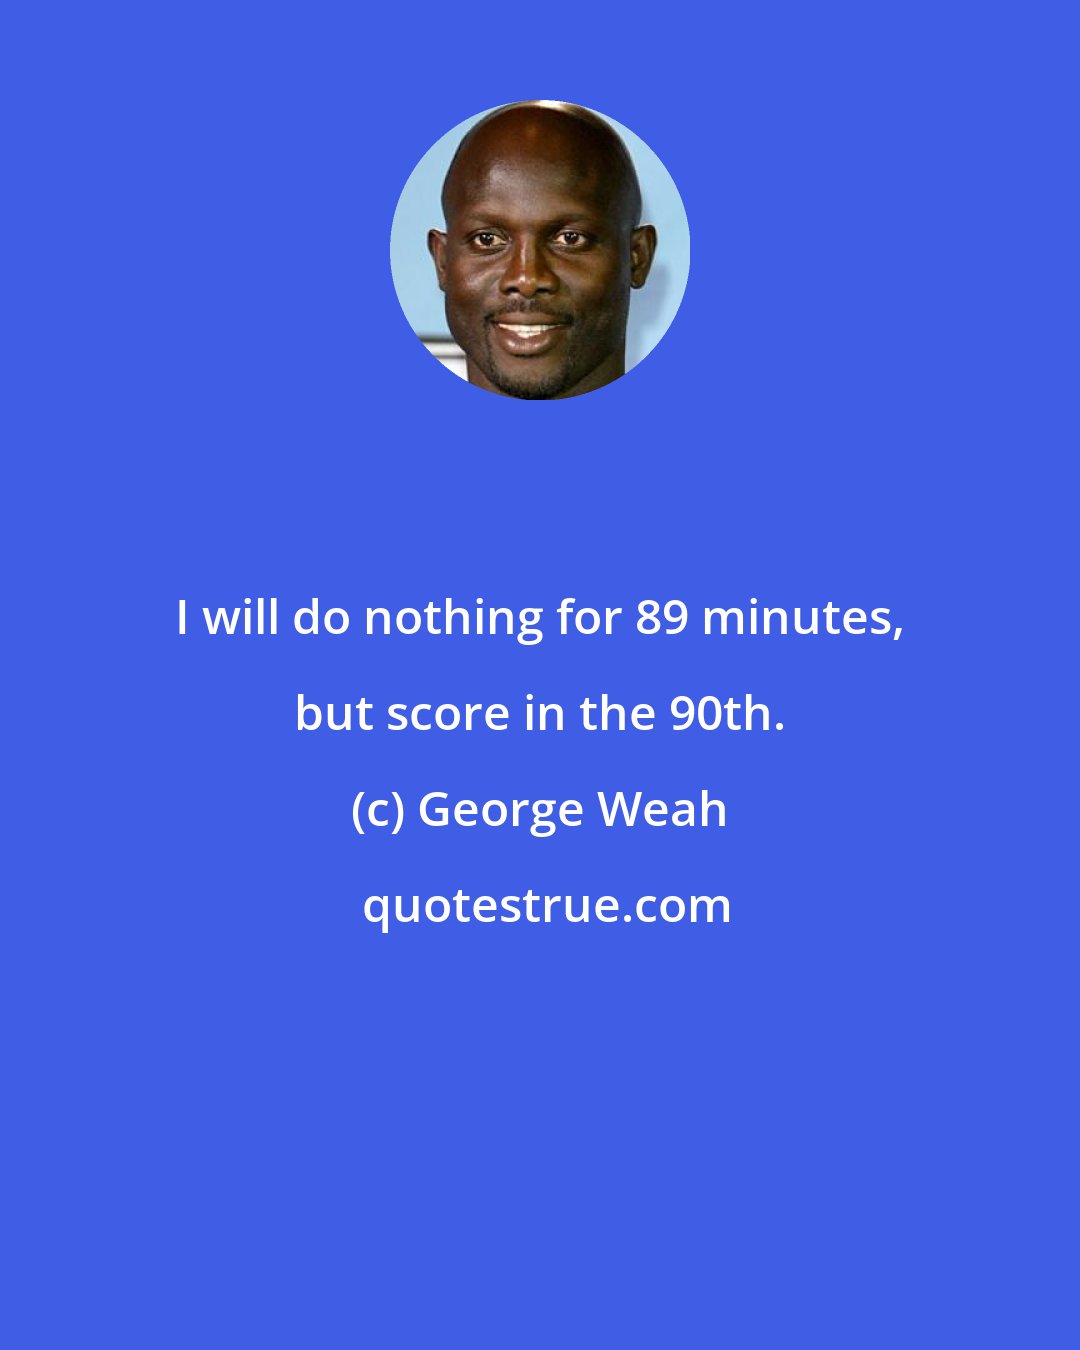 George Weah: I will do nothing for 89 minutes, but score in the 90th.